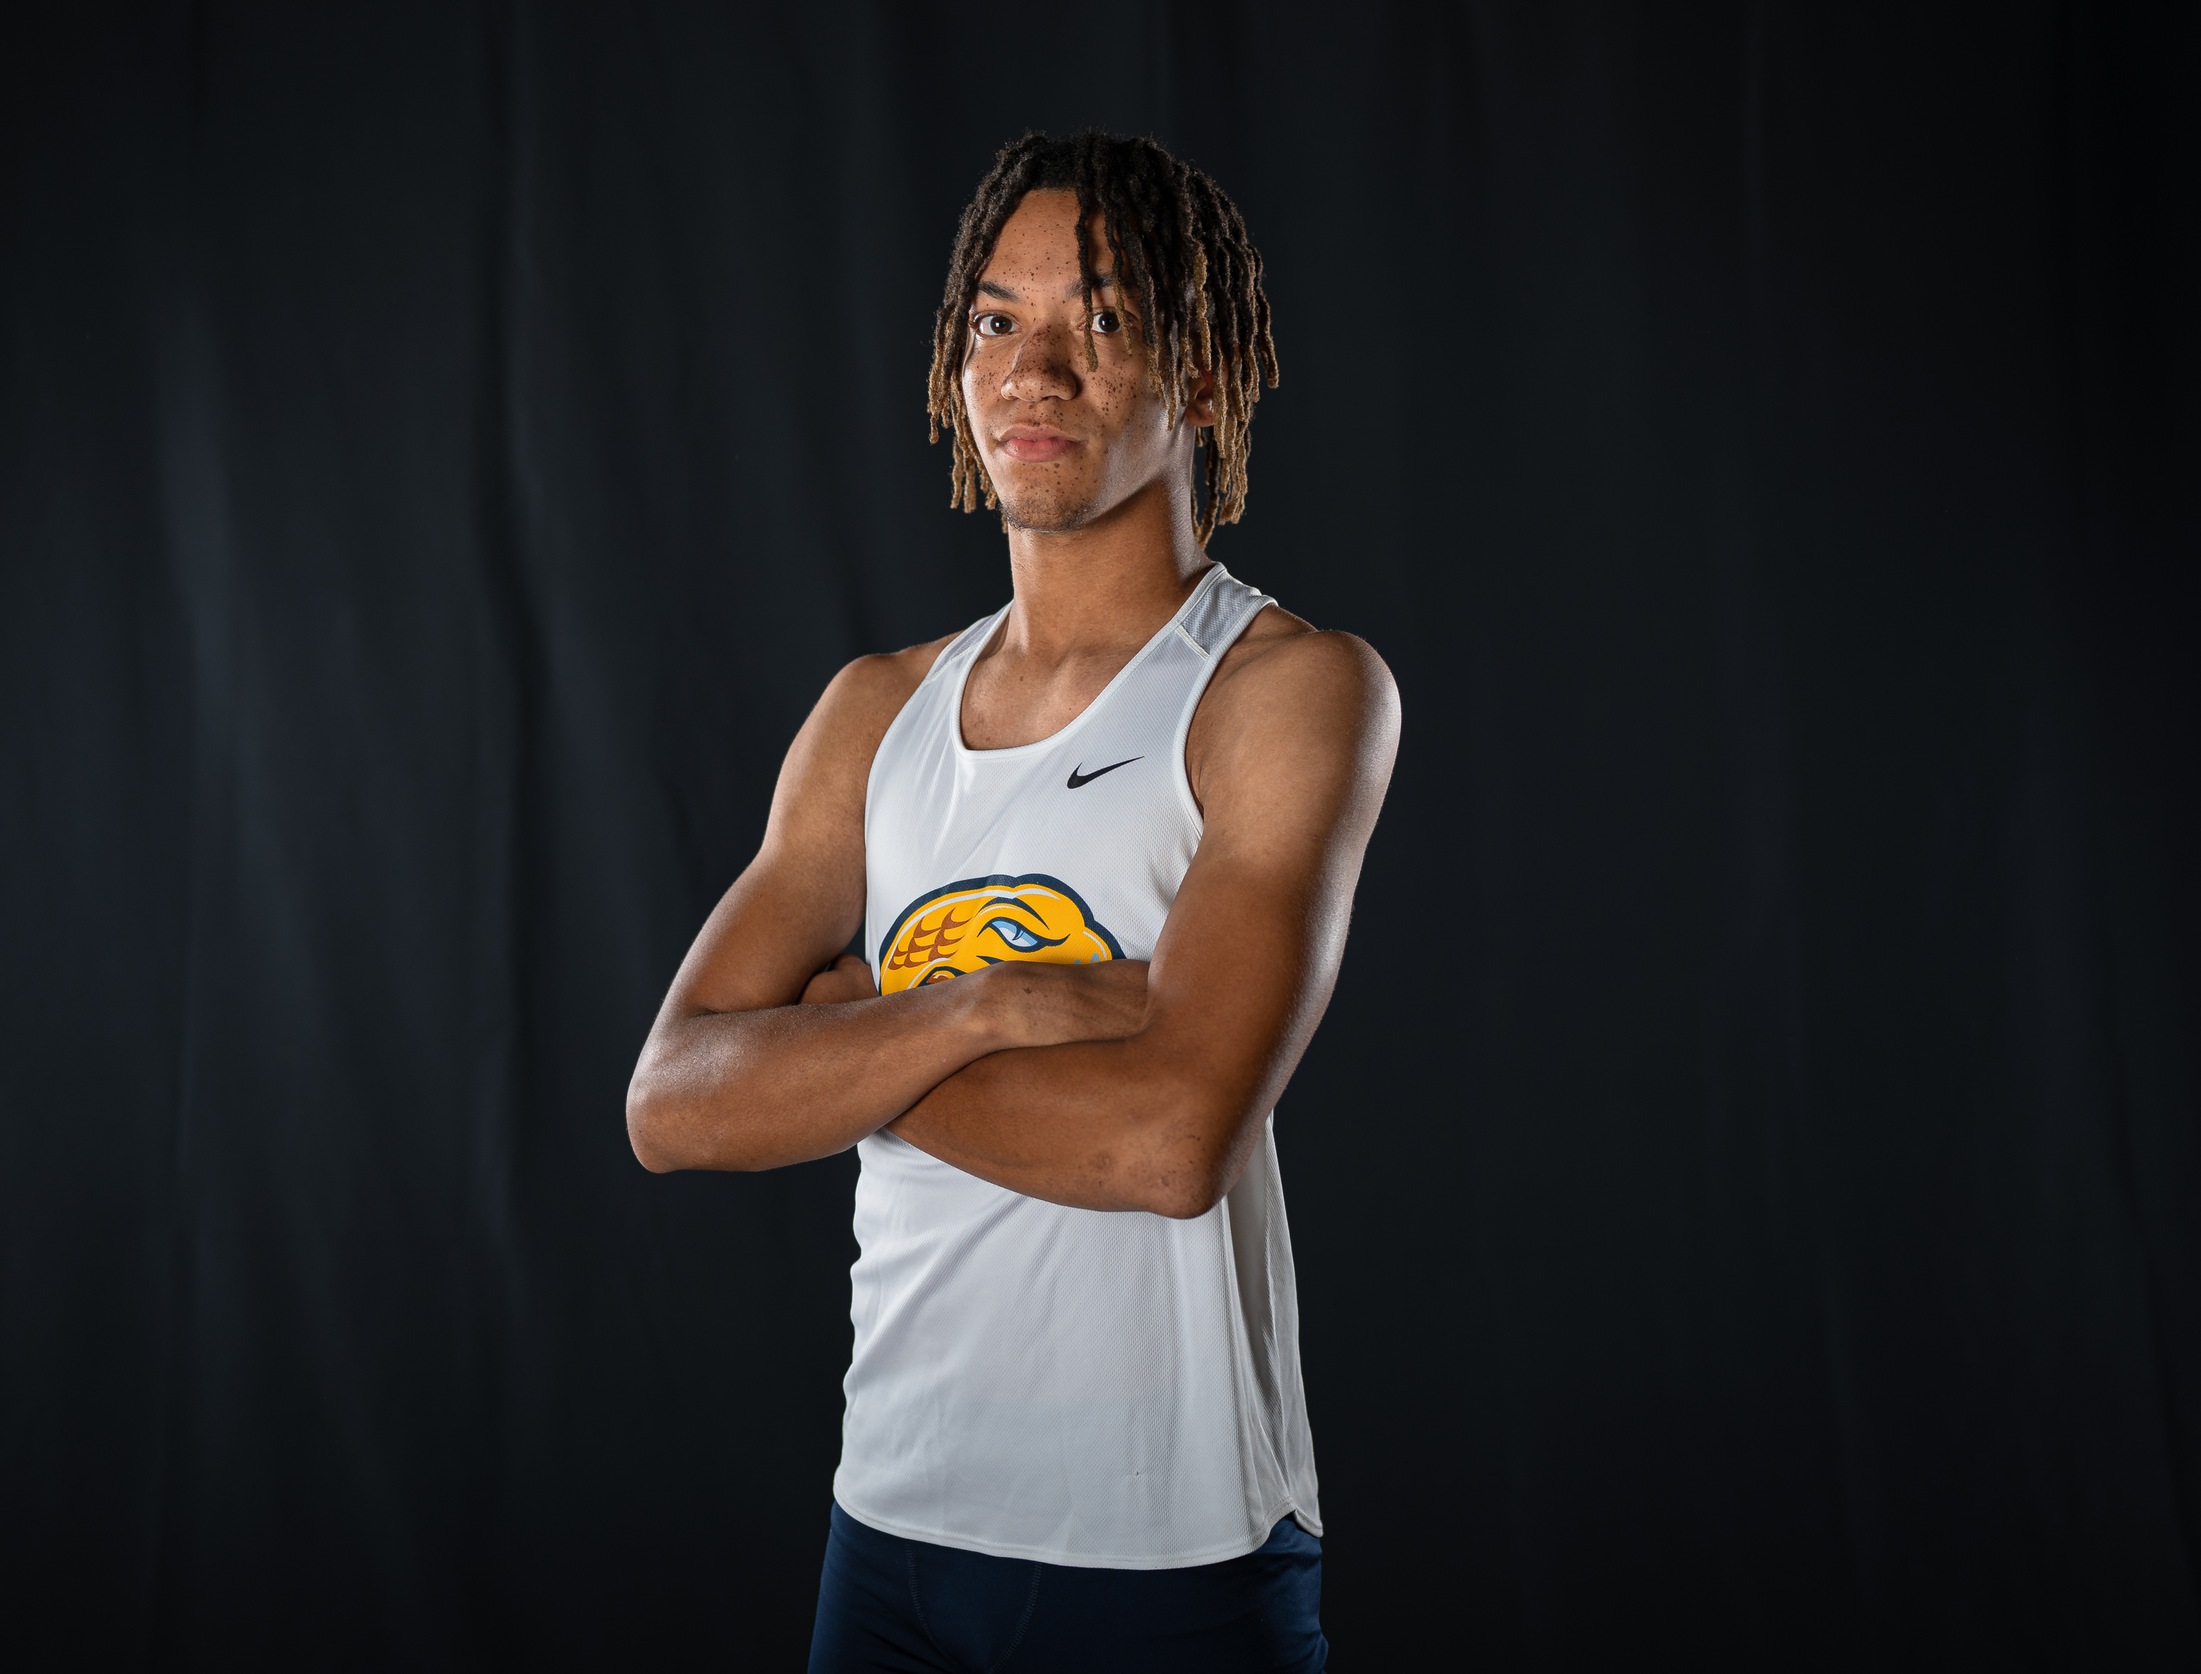 Men's Track and Field has three top-three finishes for First Meet of Indoor Season